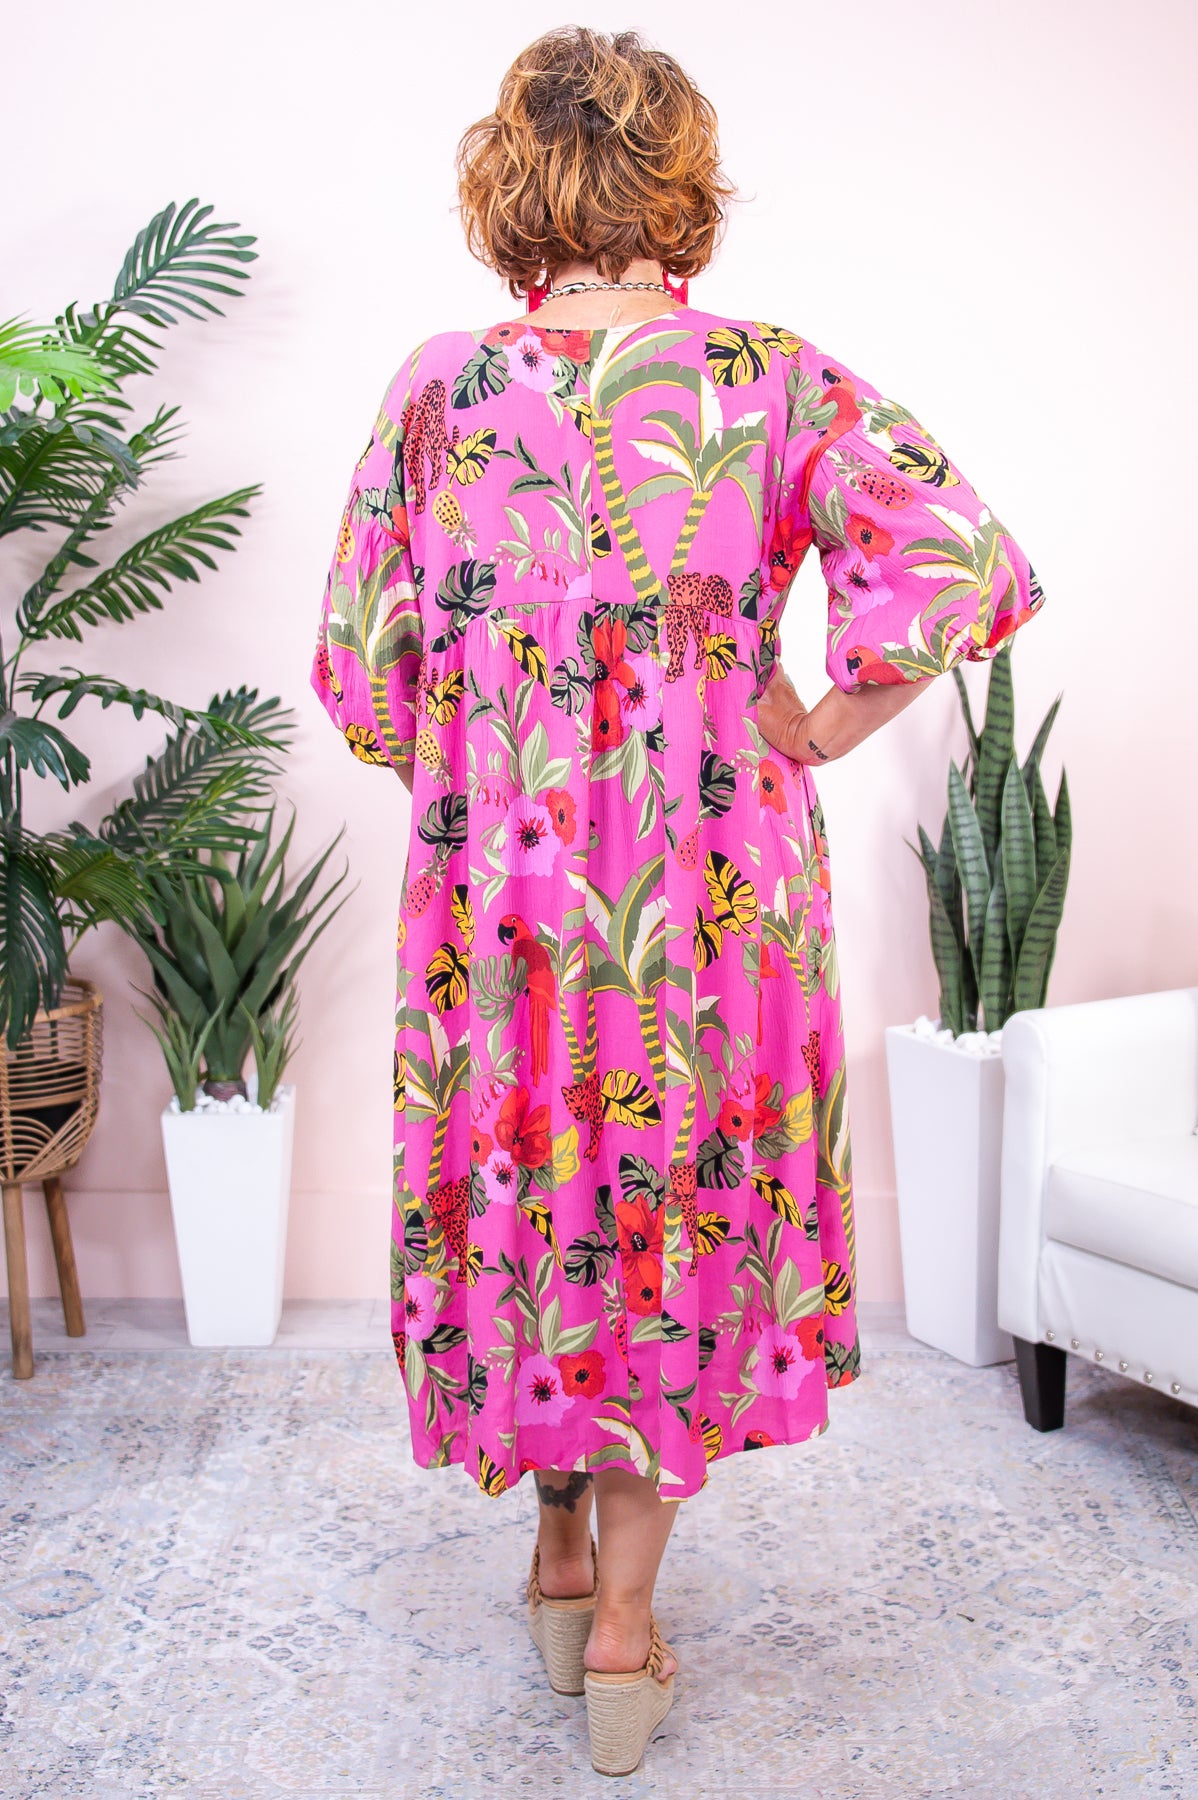 Dreaming Of Paradise Pink/Multi Color Floral/Printed Dress - D5109PK